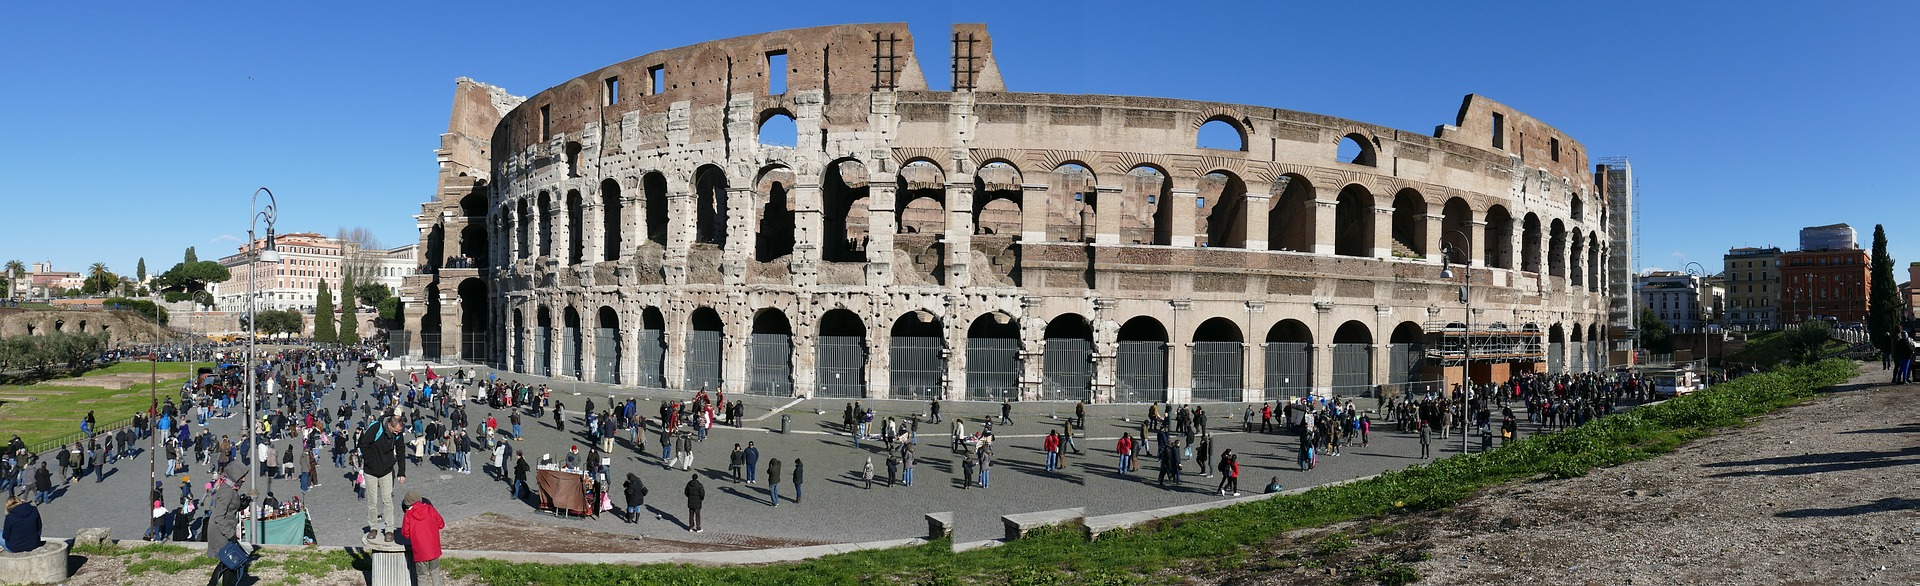 Panoramic View of Colosseum